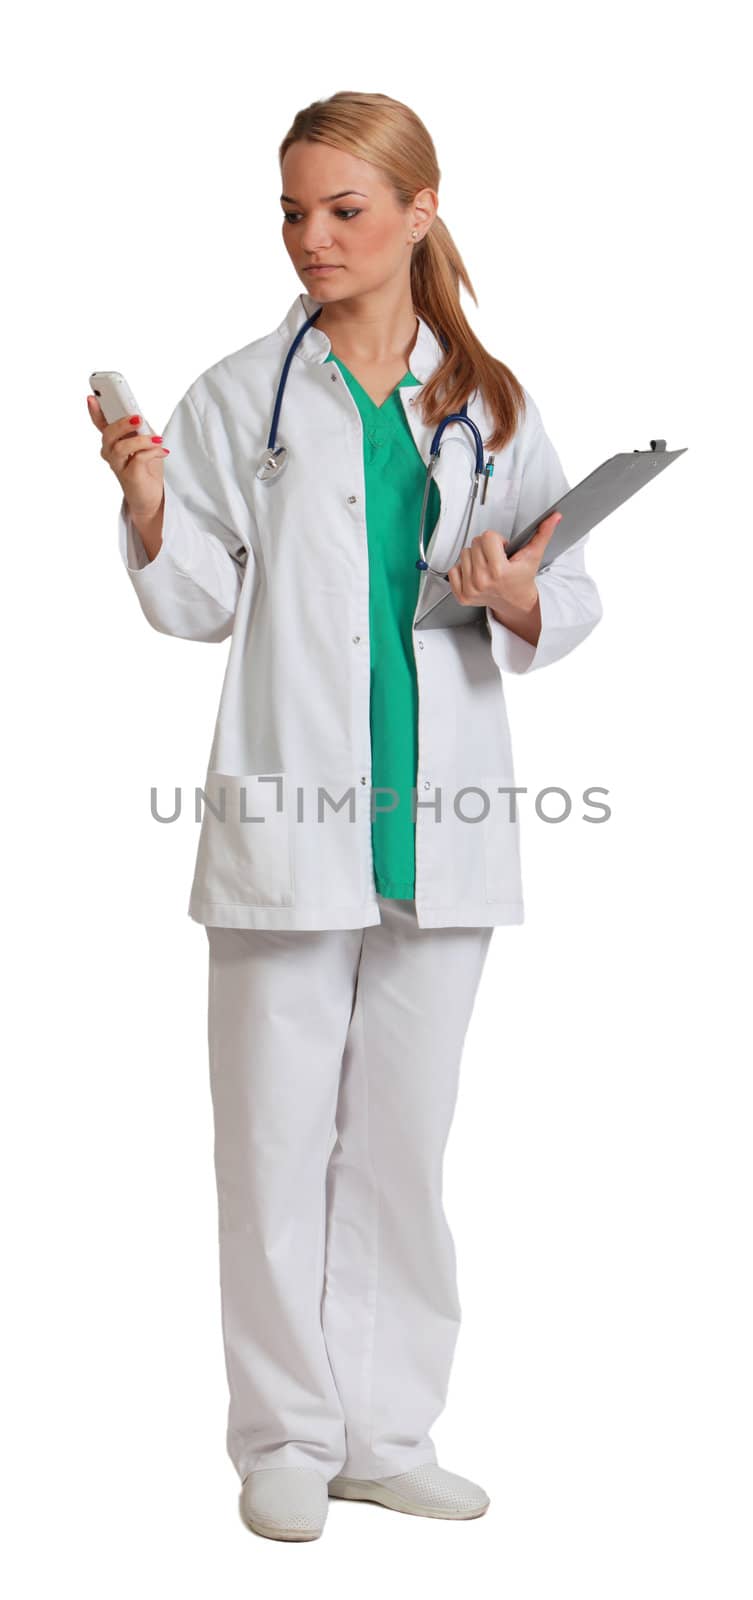 Young blonde woman doctor reading a phone message, isolated against a white background.